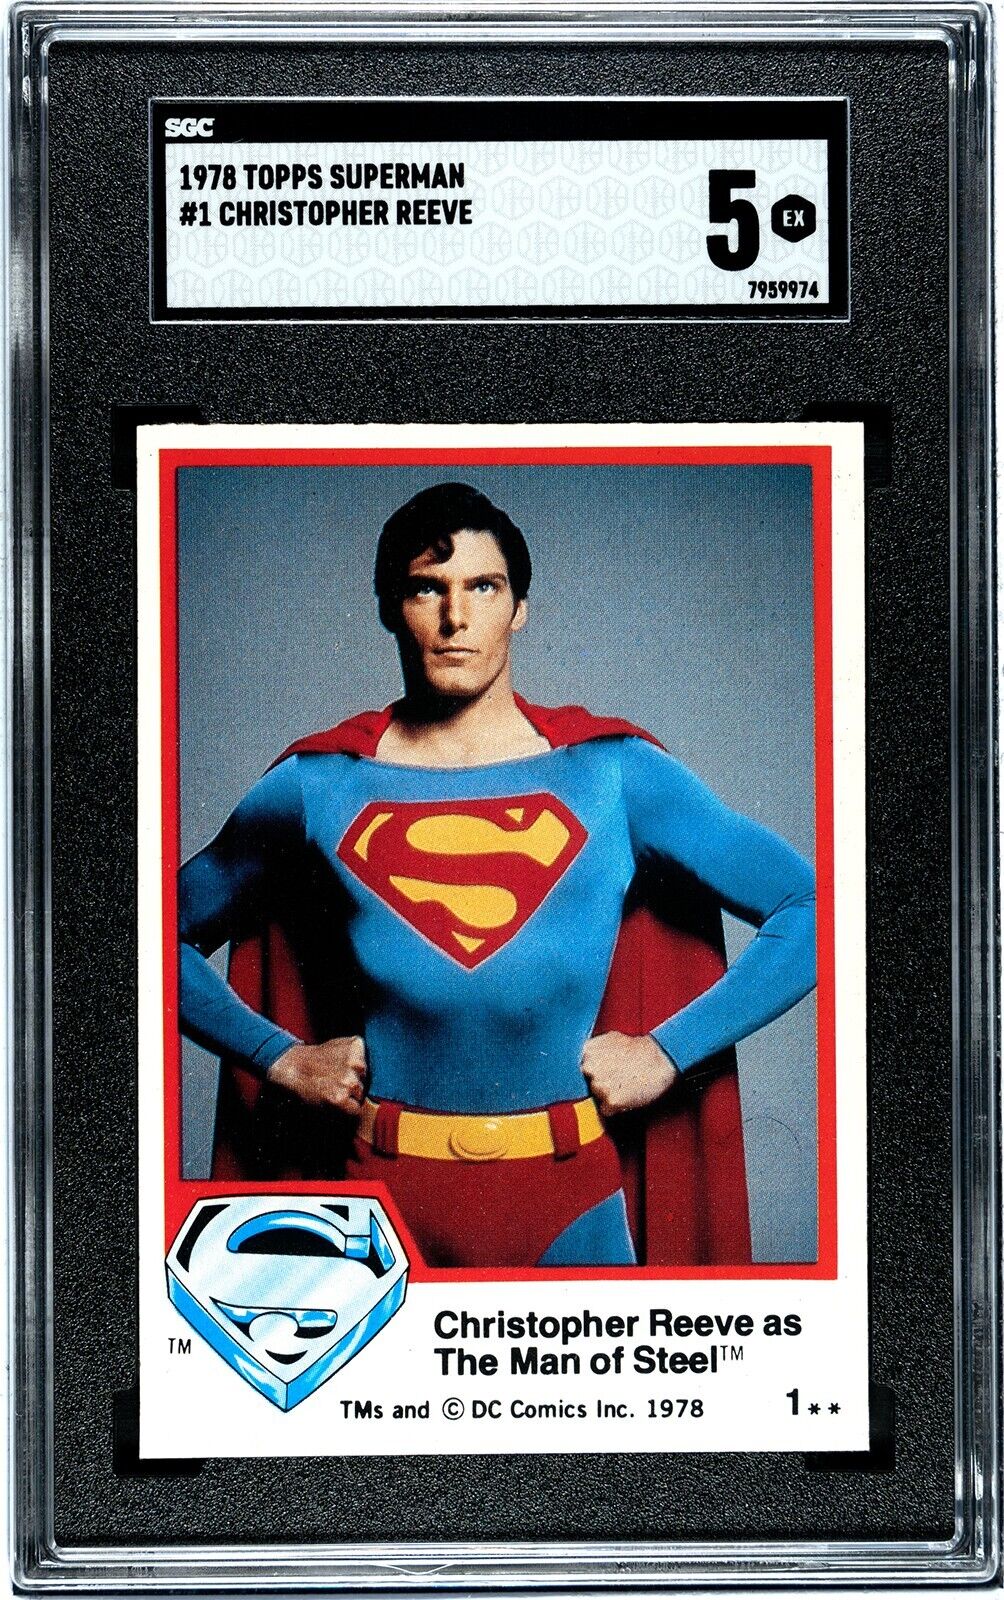 1978 Topps Superman The Movie Christopher Reeve #1 SGC 5